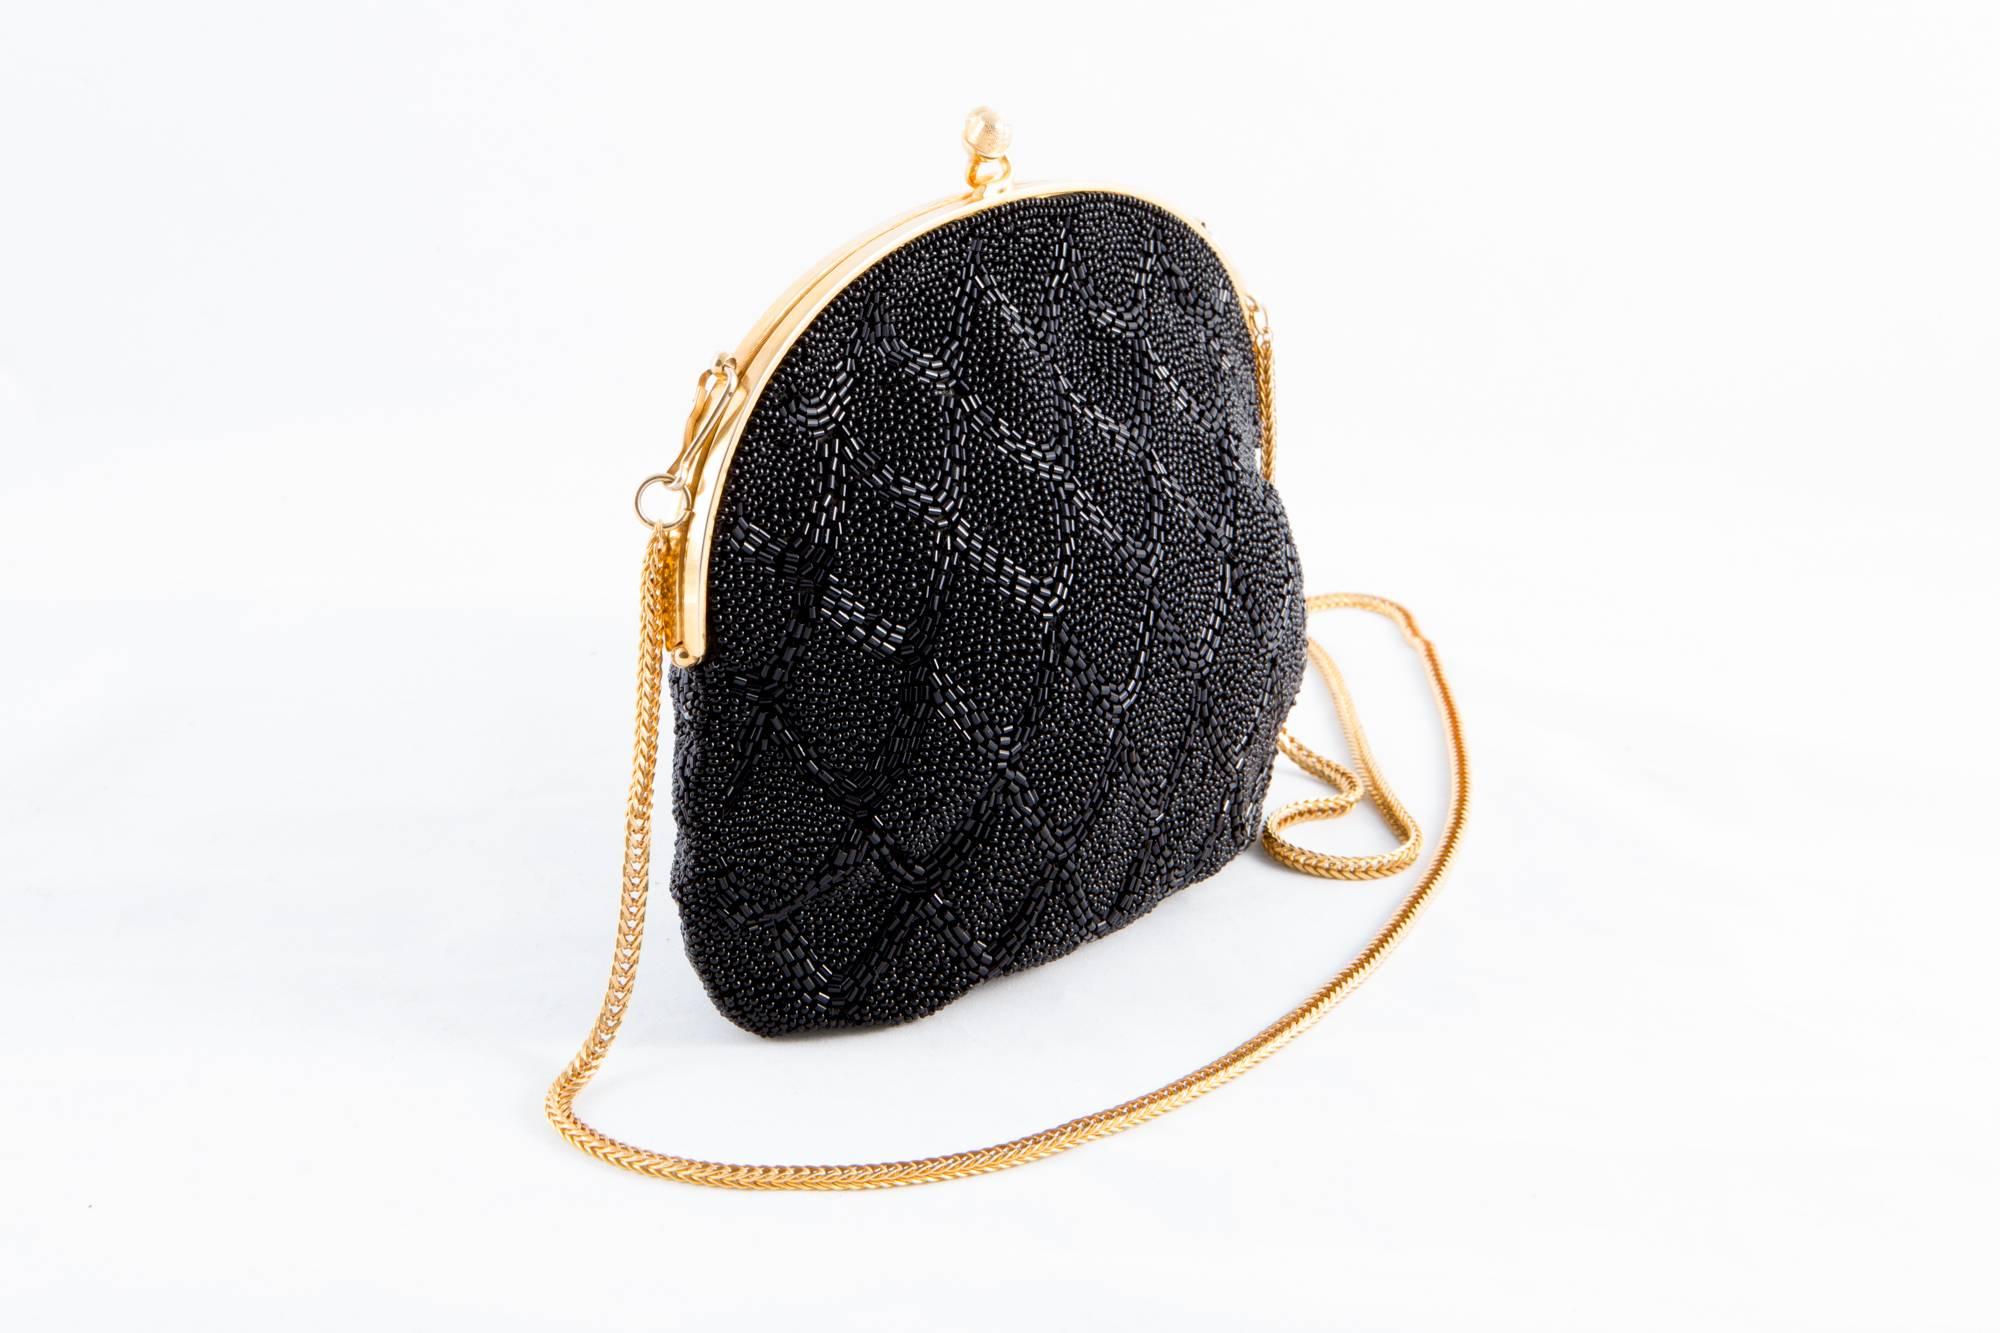 1960s Black beaded evening small tote bag featuring  a beaded design pattern,  a detachable chain handle ( total length:38,9 in. (99cm)), an inside silk lining. 
In excellent vintage condition. Made in France.
Measurements:
Length 7.8in. (20cm)